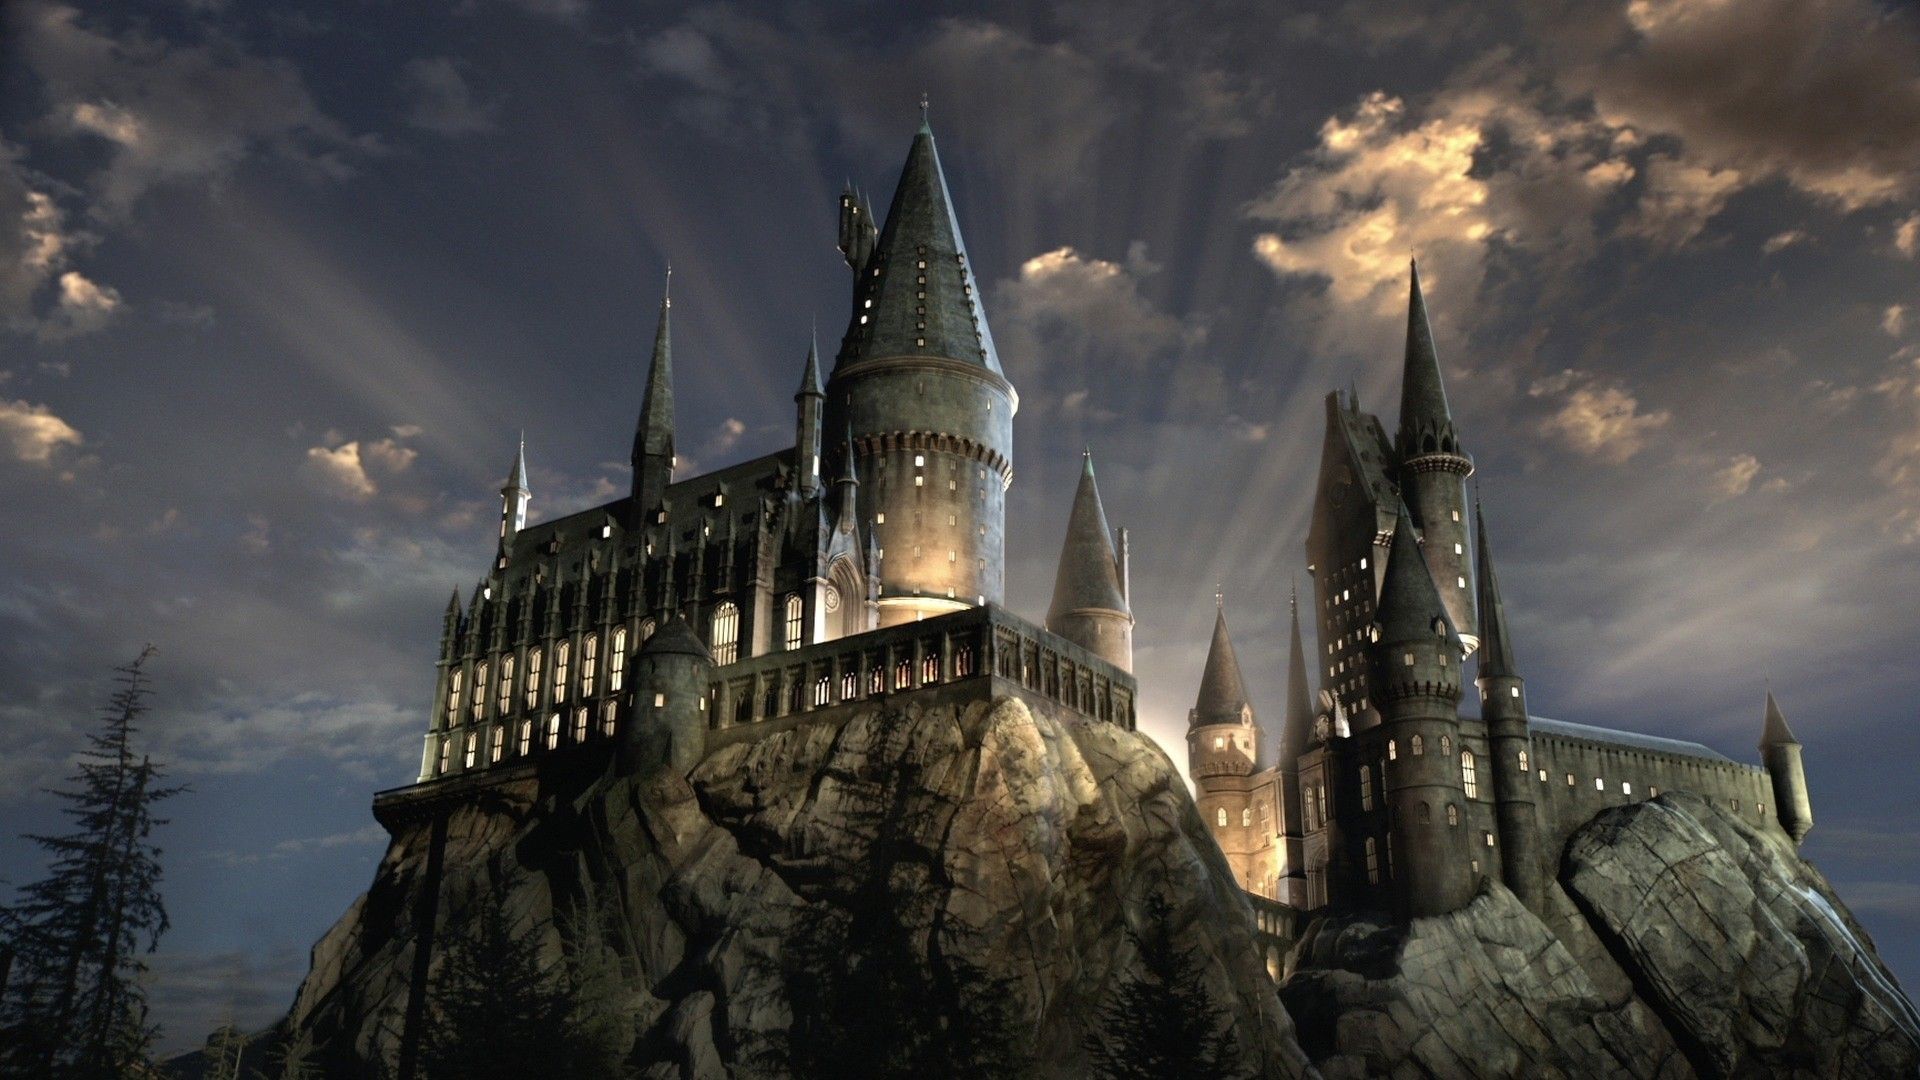 What place would most like to visit at Hogwarts?